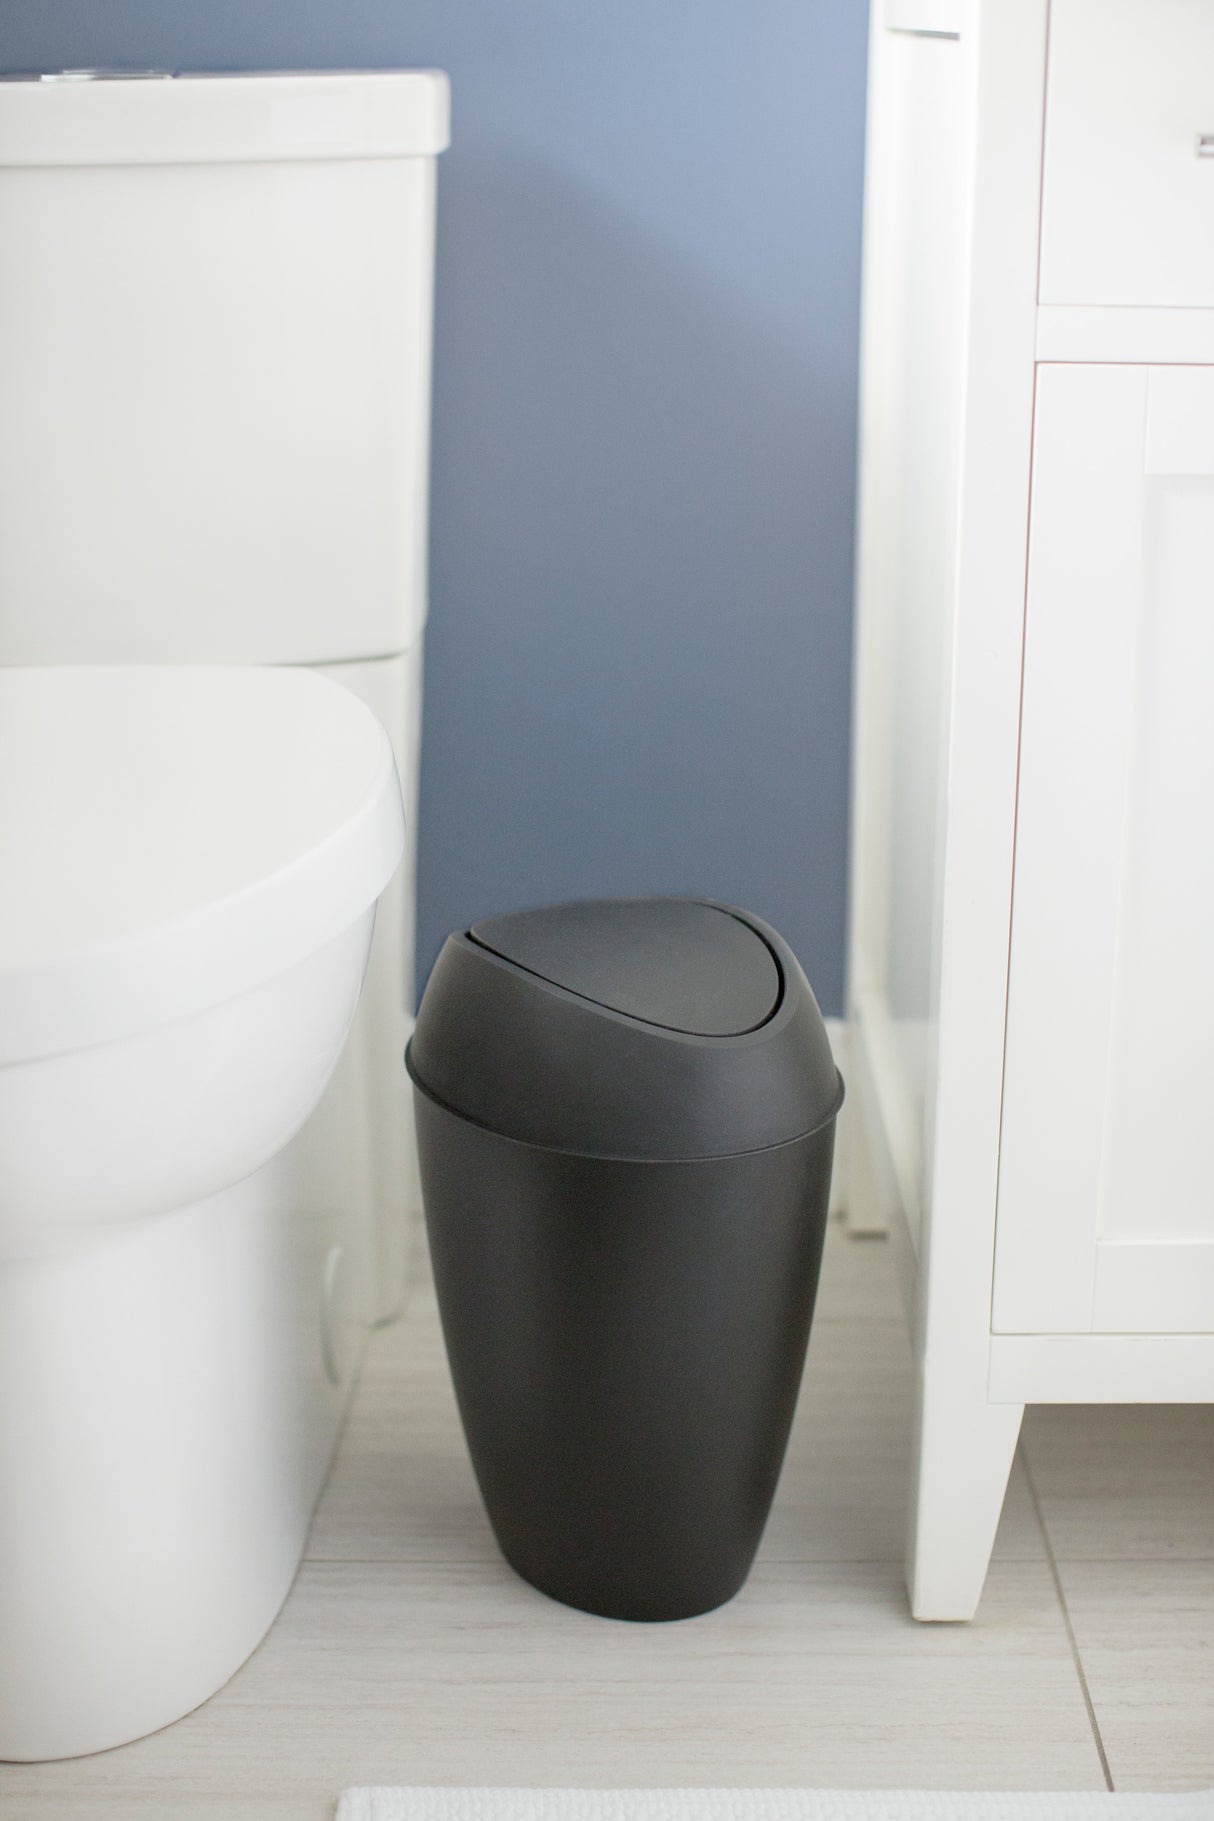 Stylish Small Bathroom Trash Cans for $15 or Less